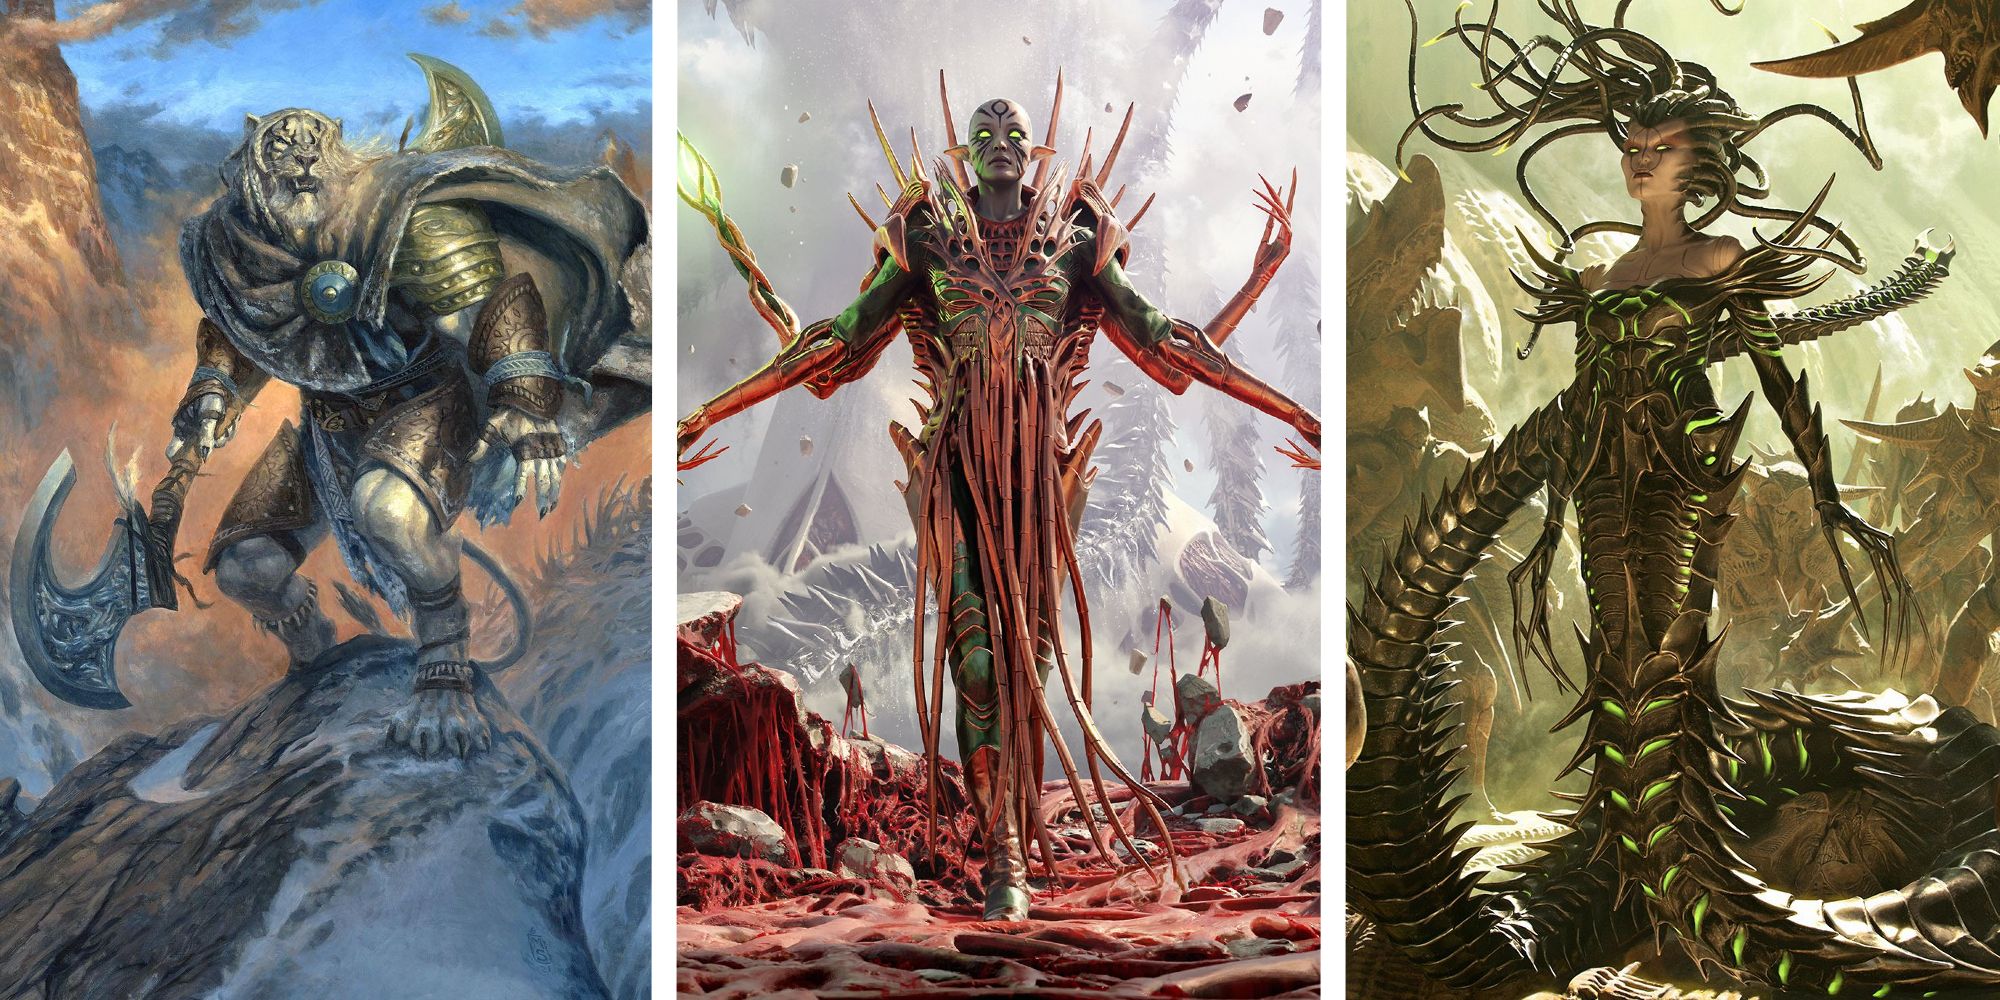 Magic The Gathering Compleated Planeswalkers Ajani, Nissa, and Vraska artwork